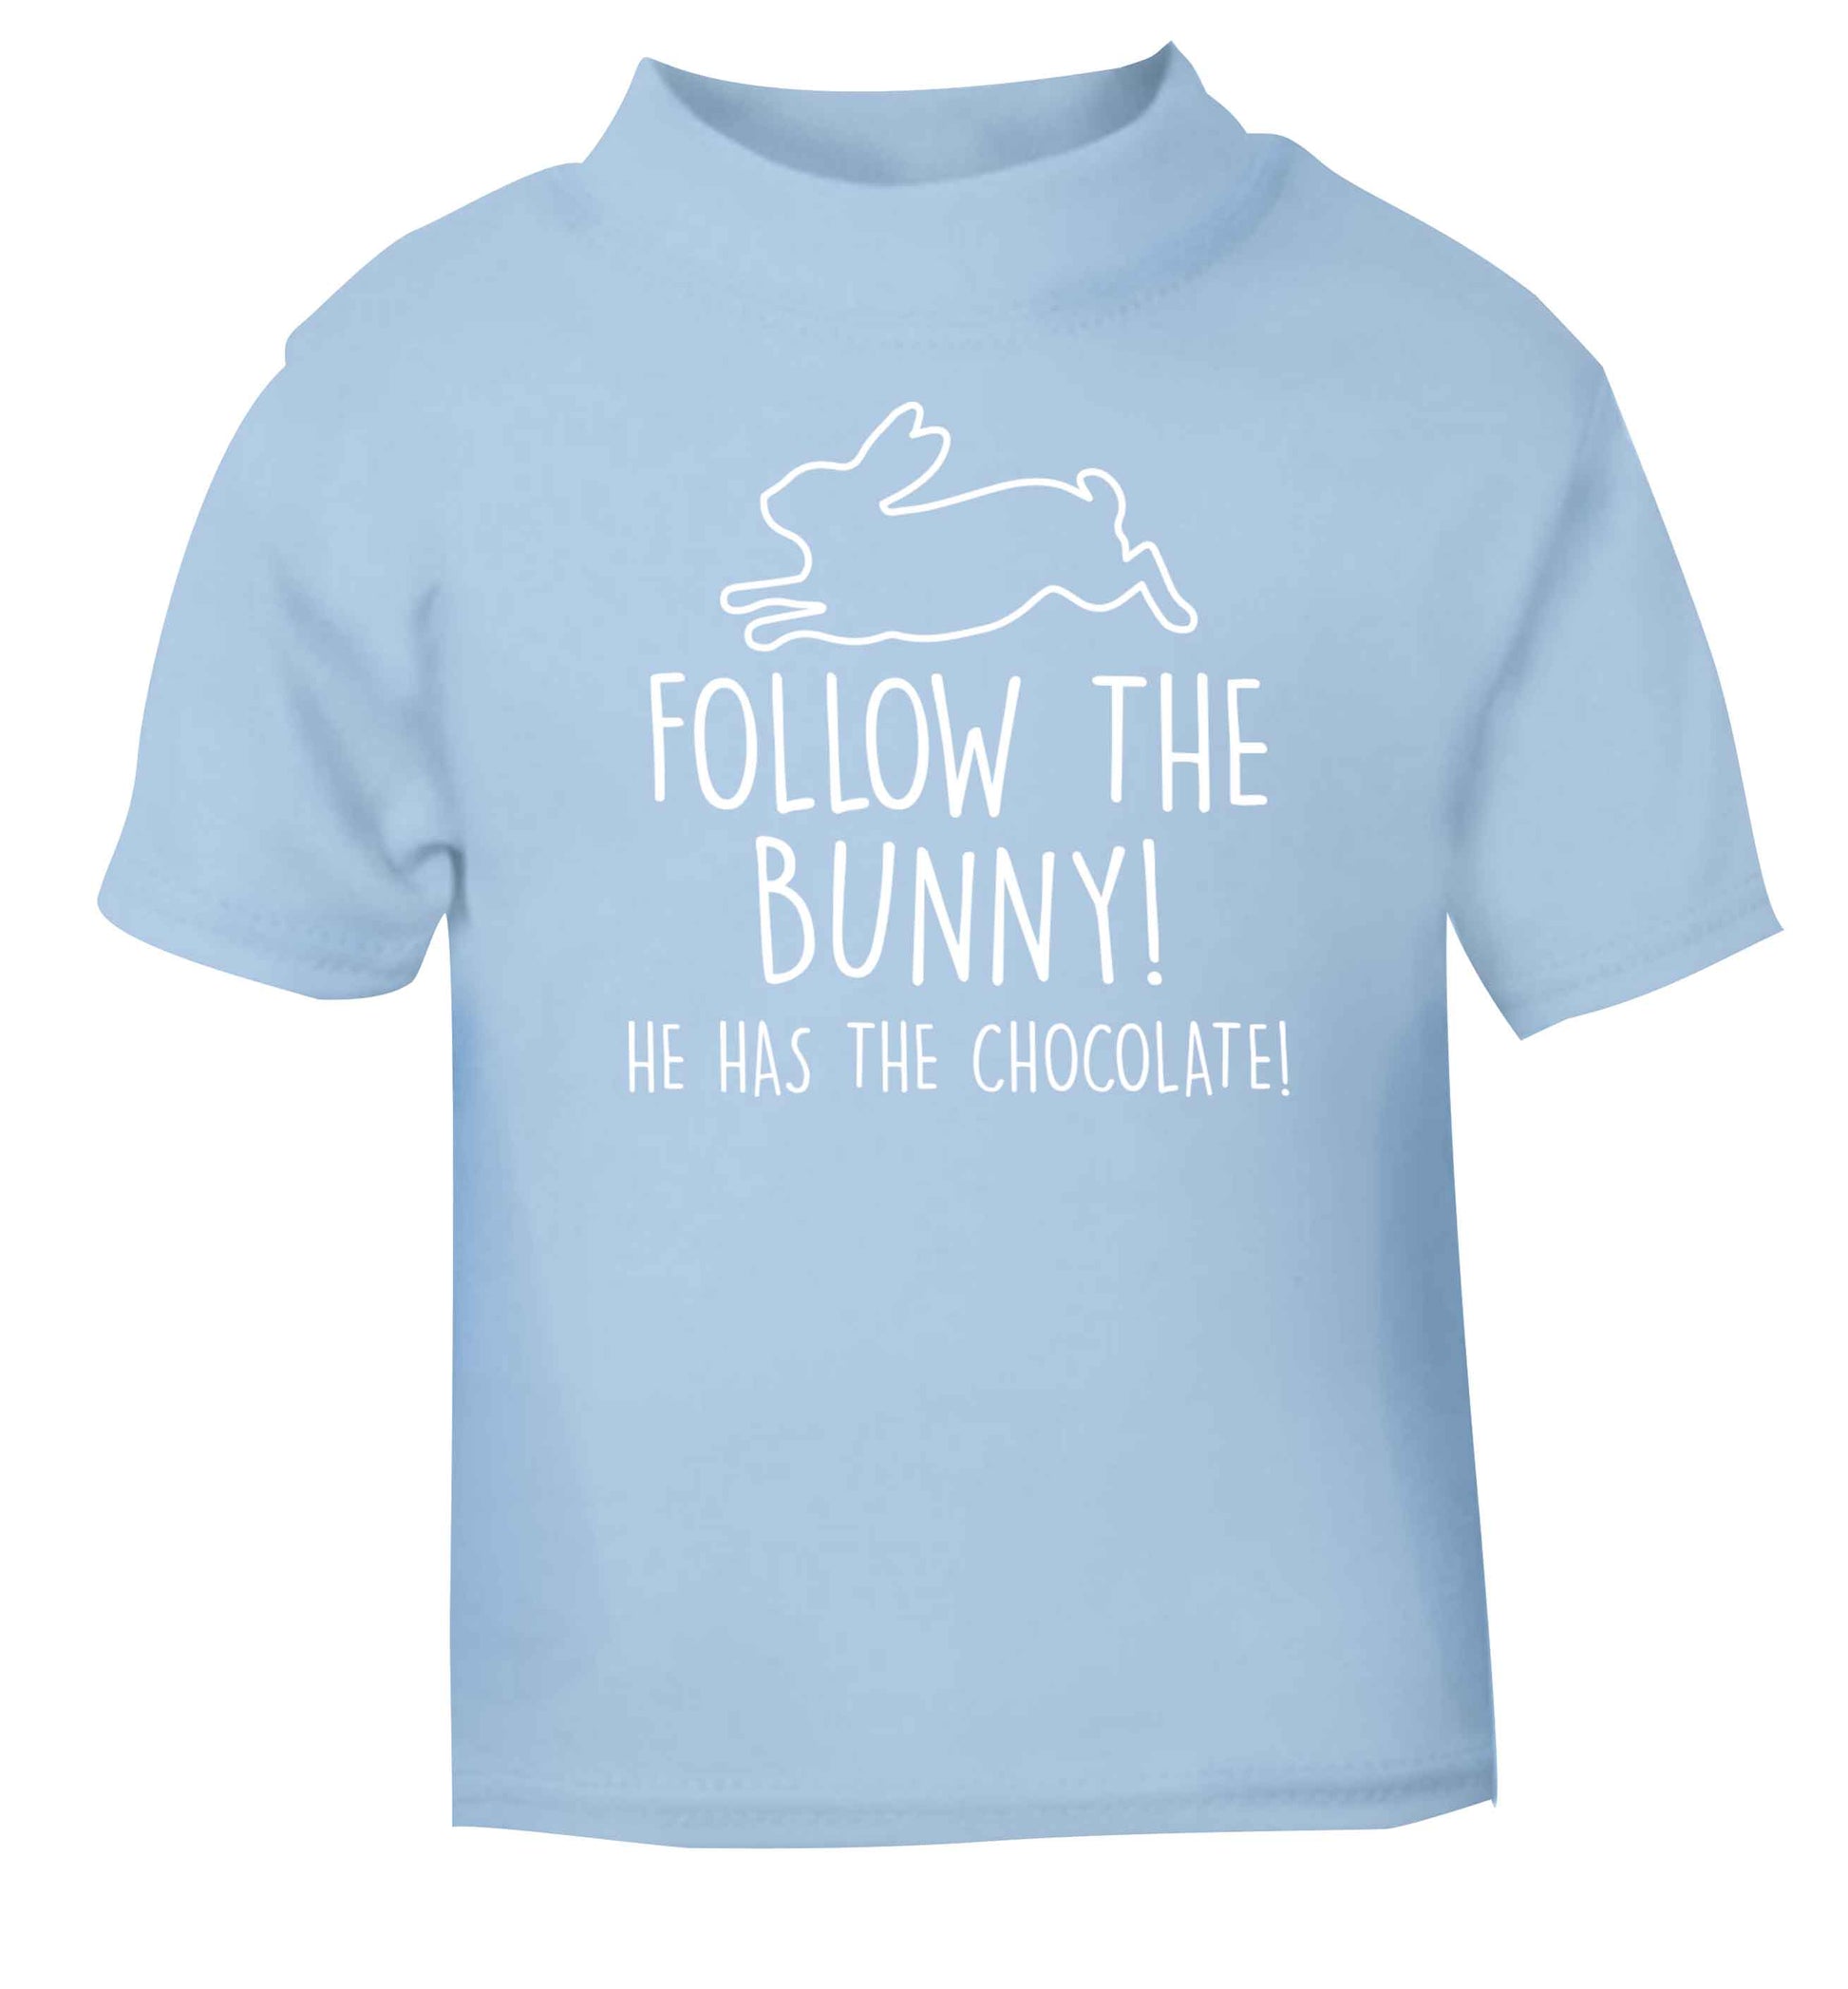 Follow the bunny! He has the chocolate light blue baby toddler Tshirt 2 Years